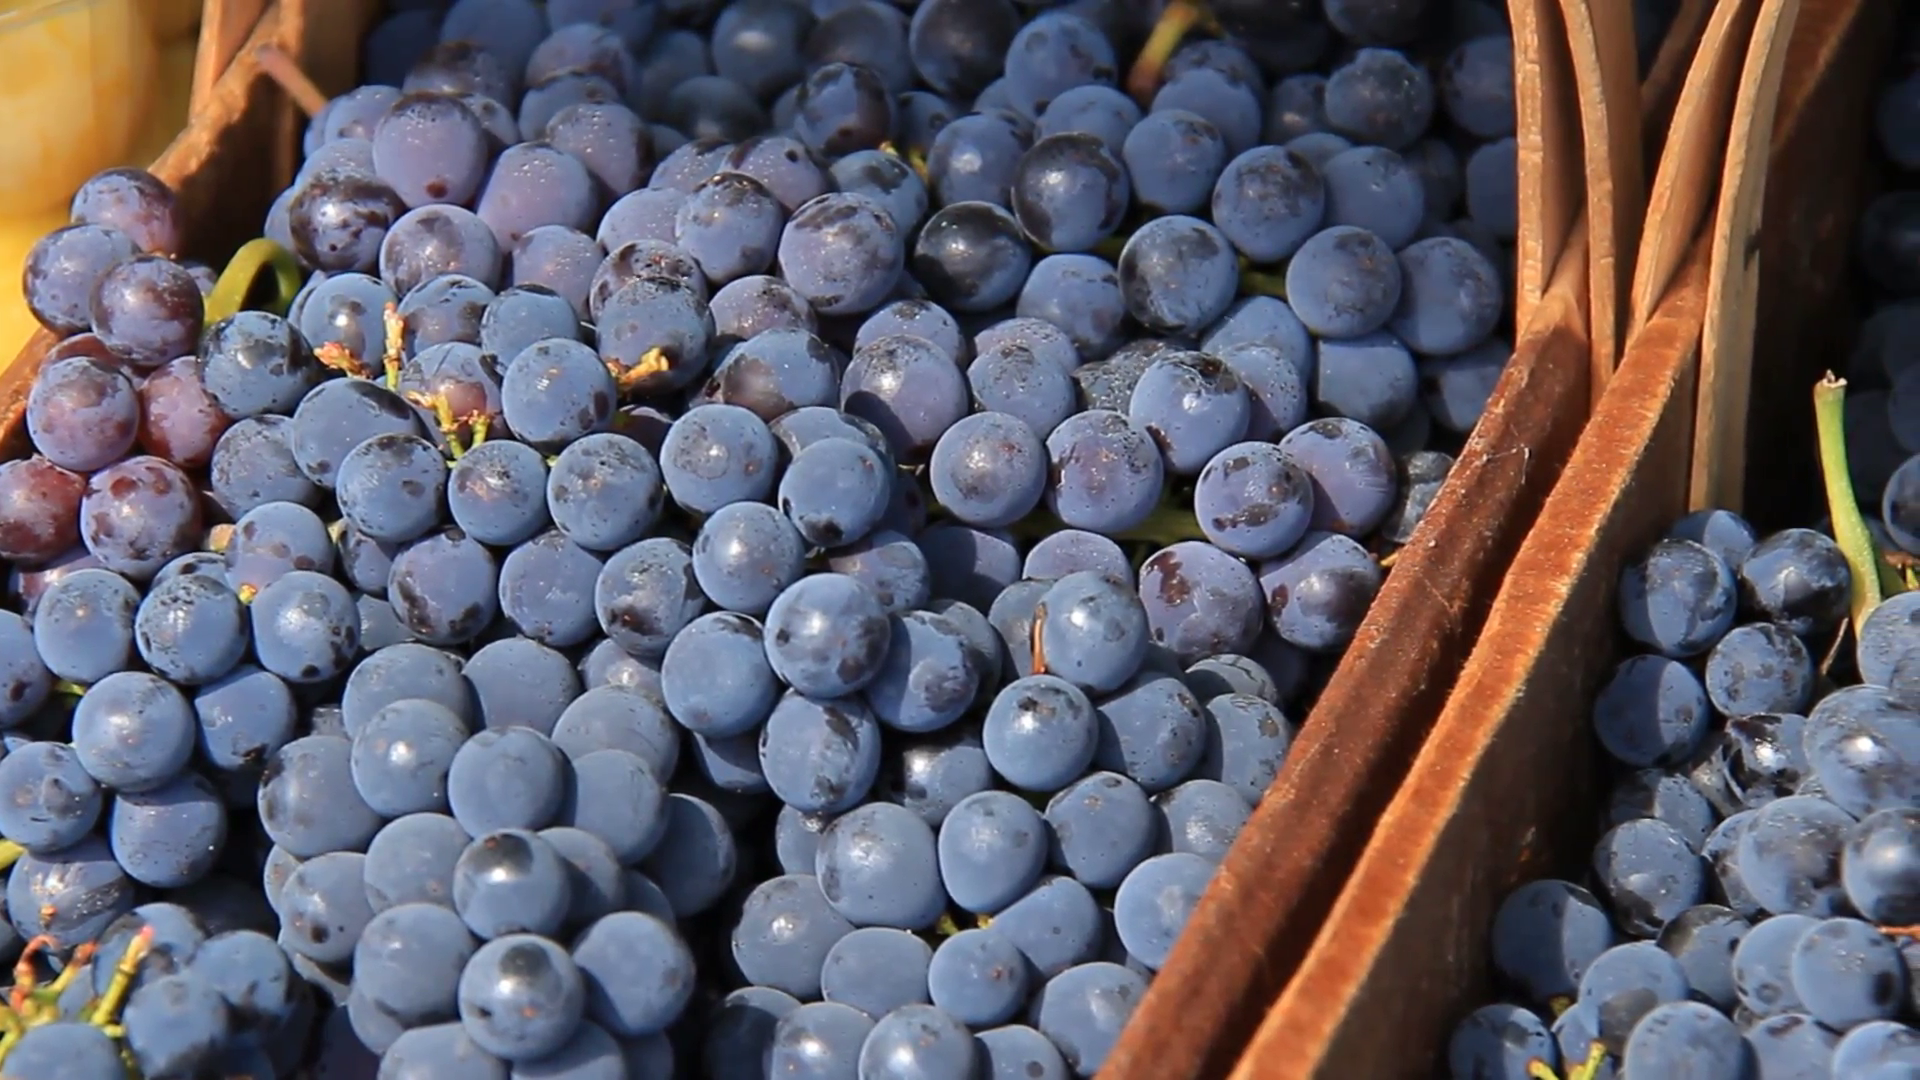 purple-grapes-1-clusters-of-ripe-purple-grapes-at-a-farmers-market_vkyjovjc_f0000.png